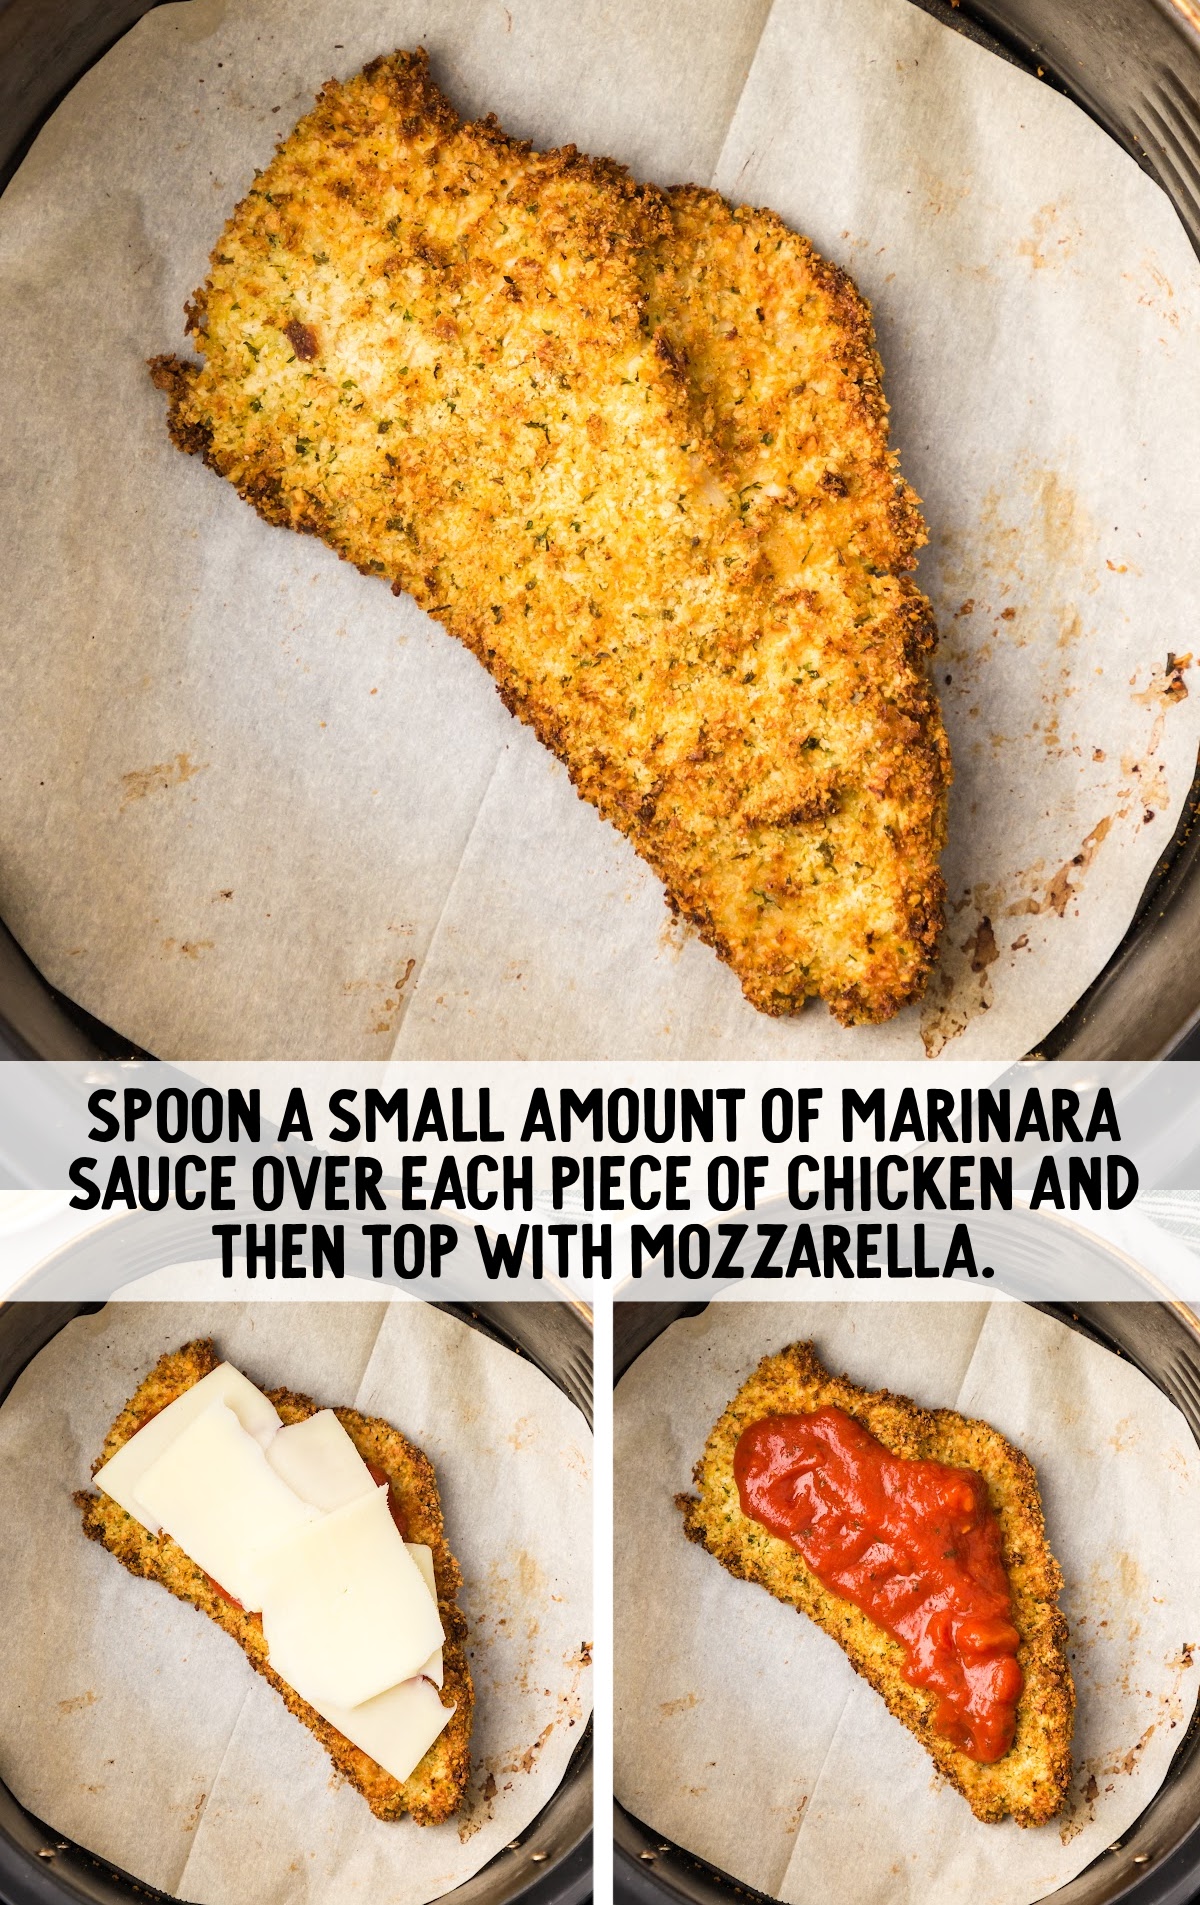 marinara sauce spooned on top of the chicken